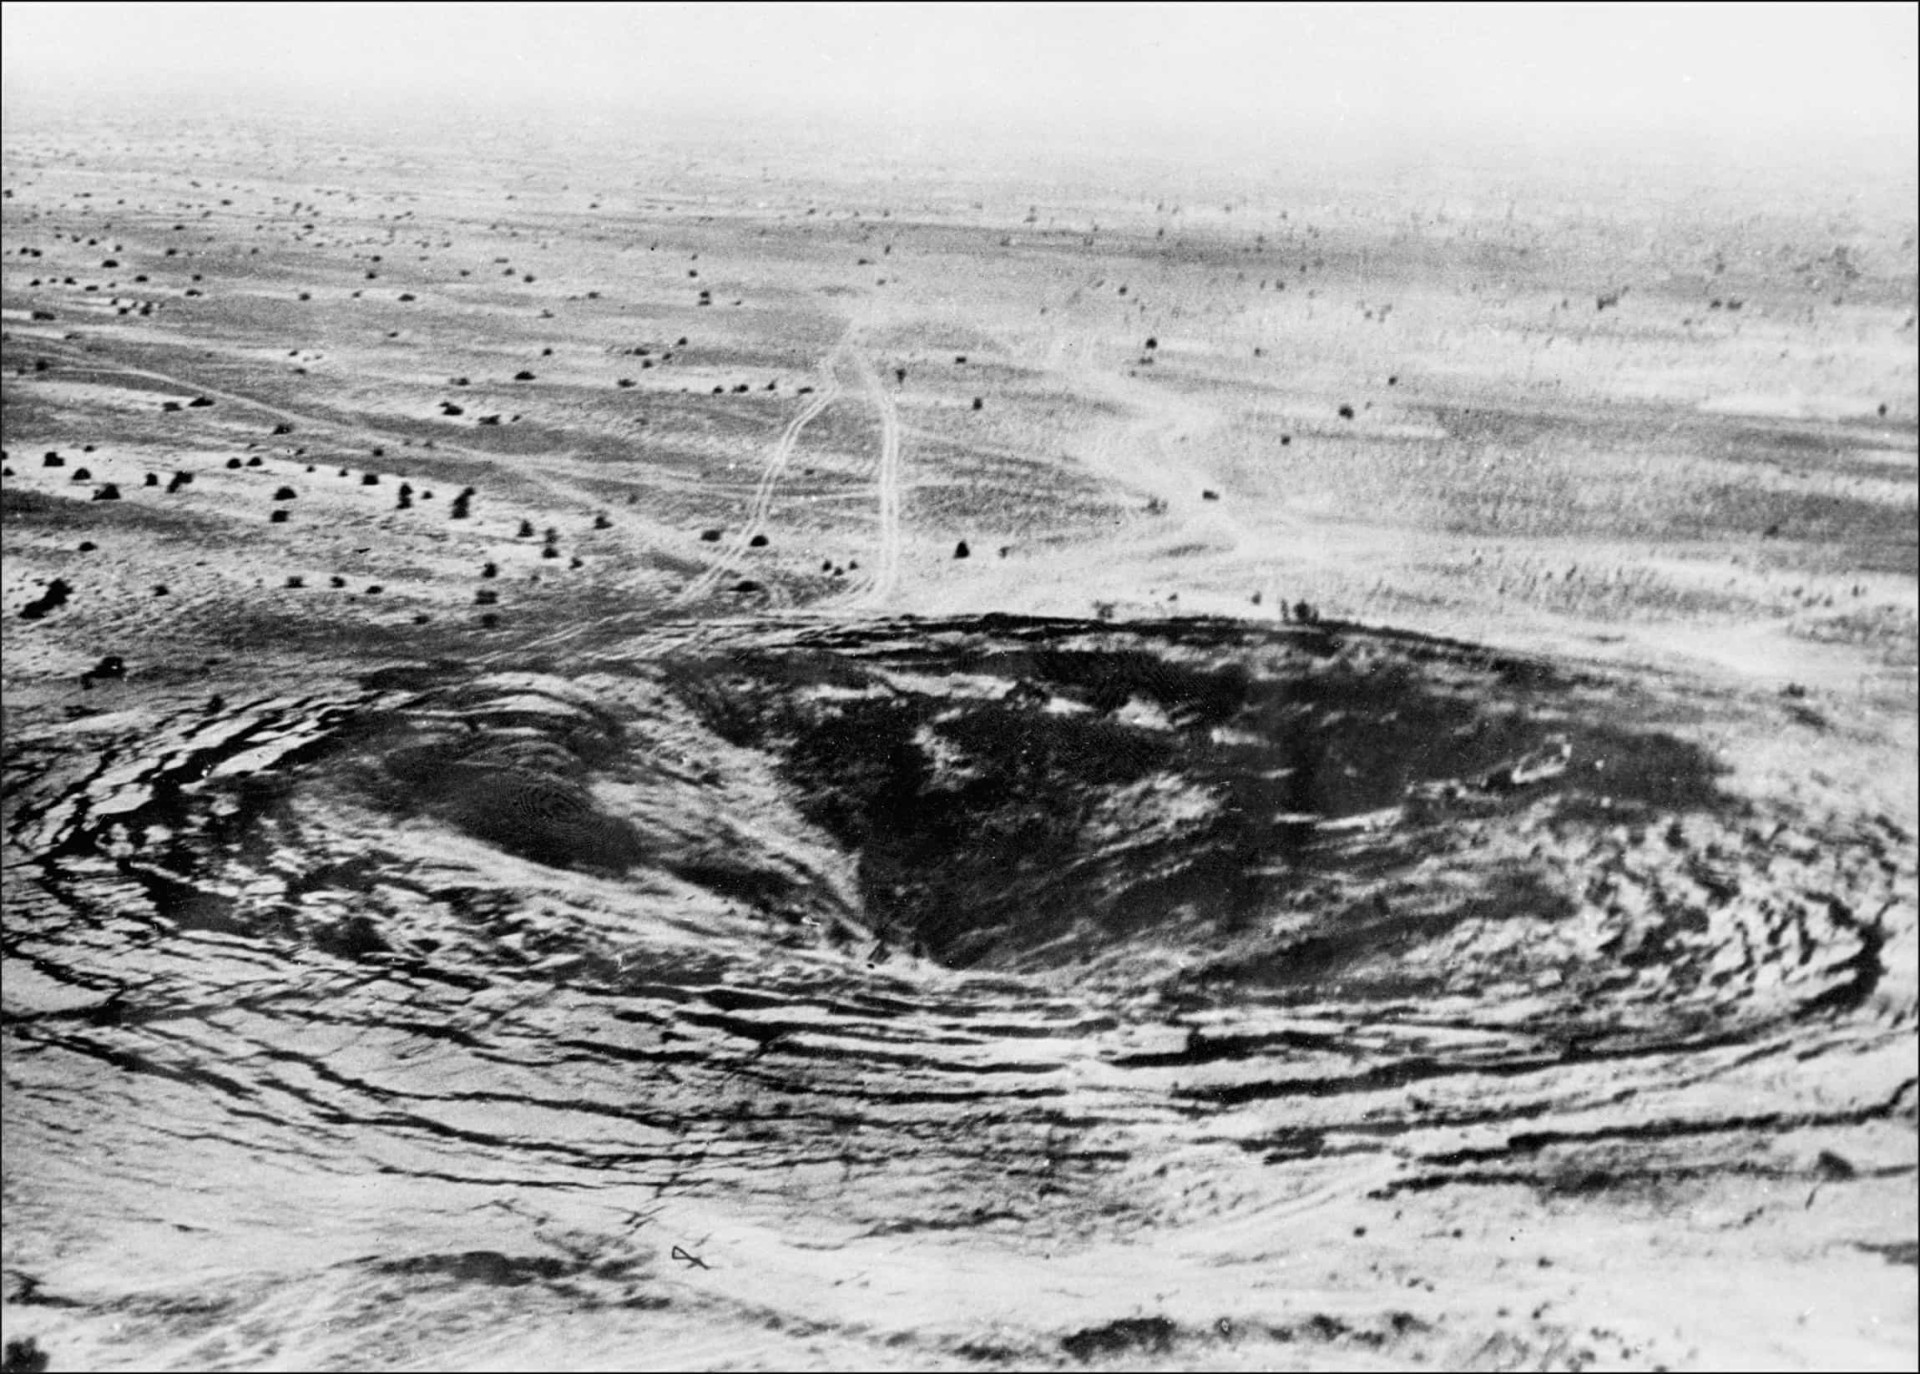 <p>India's testing of a nuclear device and the stalling of the vital SALT II talks edges the clock forward. Pictured: a crater marks the site of the first Indian underground nuclear test conducted on May 18, 1974 at Pokhran in the desert state of Rajasthan.</p><p>You may also like:<a href="https://www.starsinsider.com/n/368021?utm_source=msn.com&utm_medium=display&utm_campaign=referral_description&utm_content=490923v3en-au"> Underexplored places you should definitely visit</a></p>